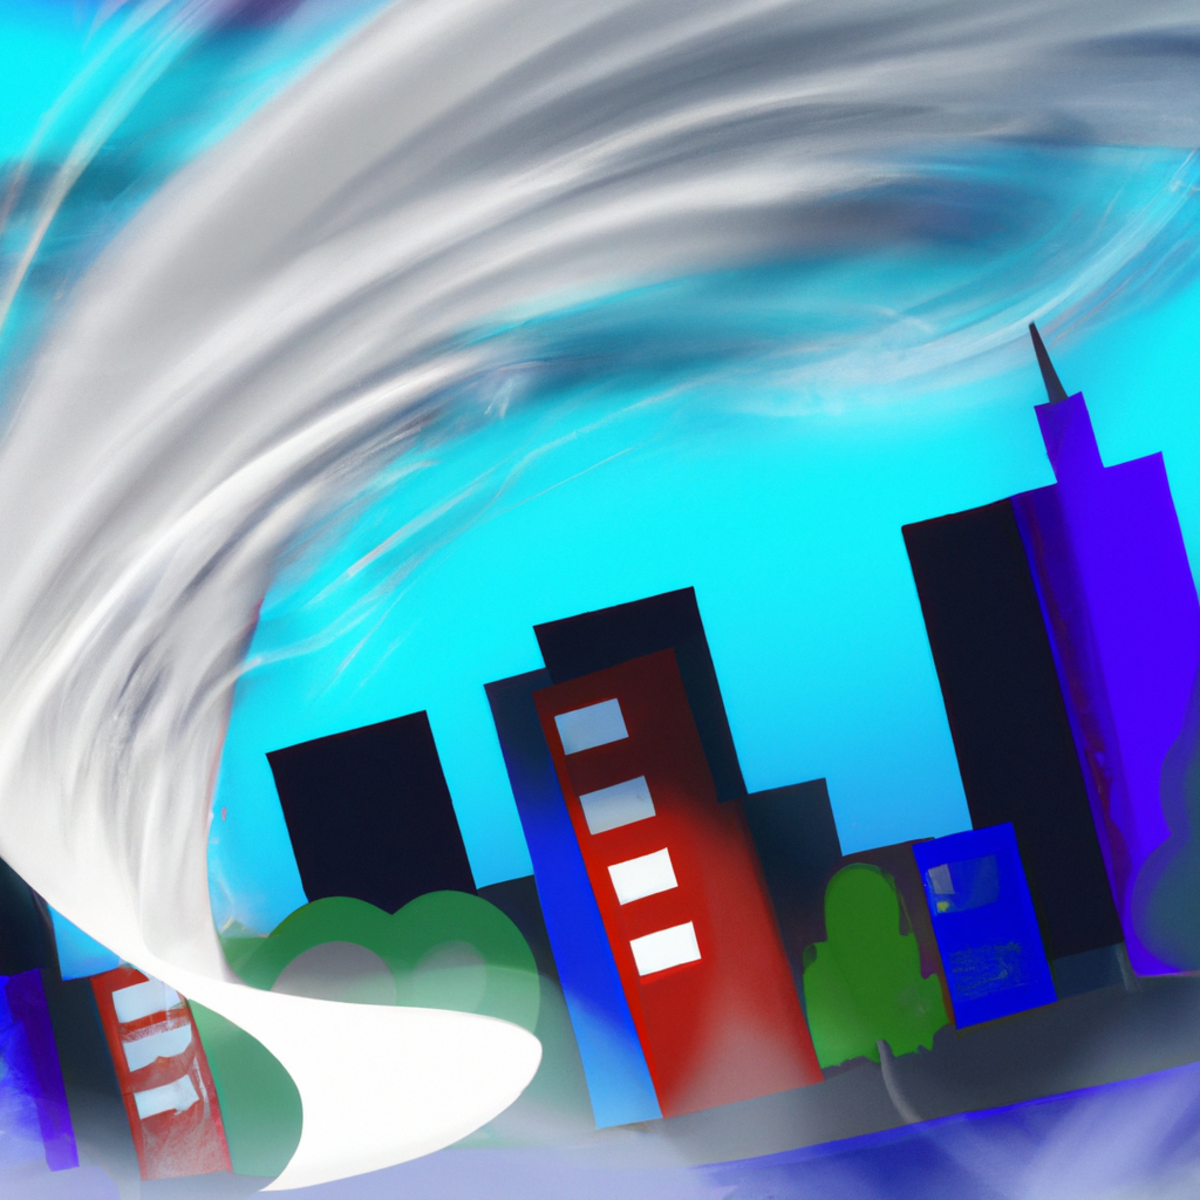 A digital art representation of a tornado sweeping through a city, symbolizing the Google Helpful Content Update causing many websites' sudden traffic loss.